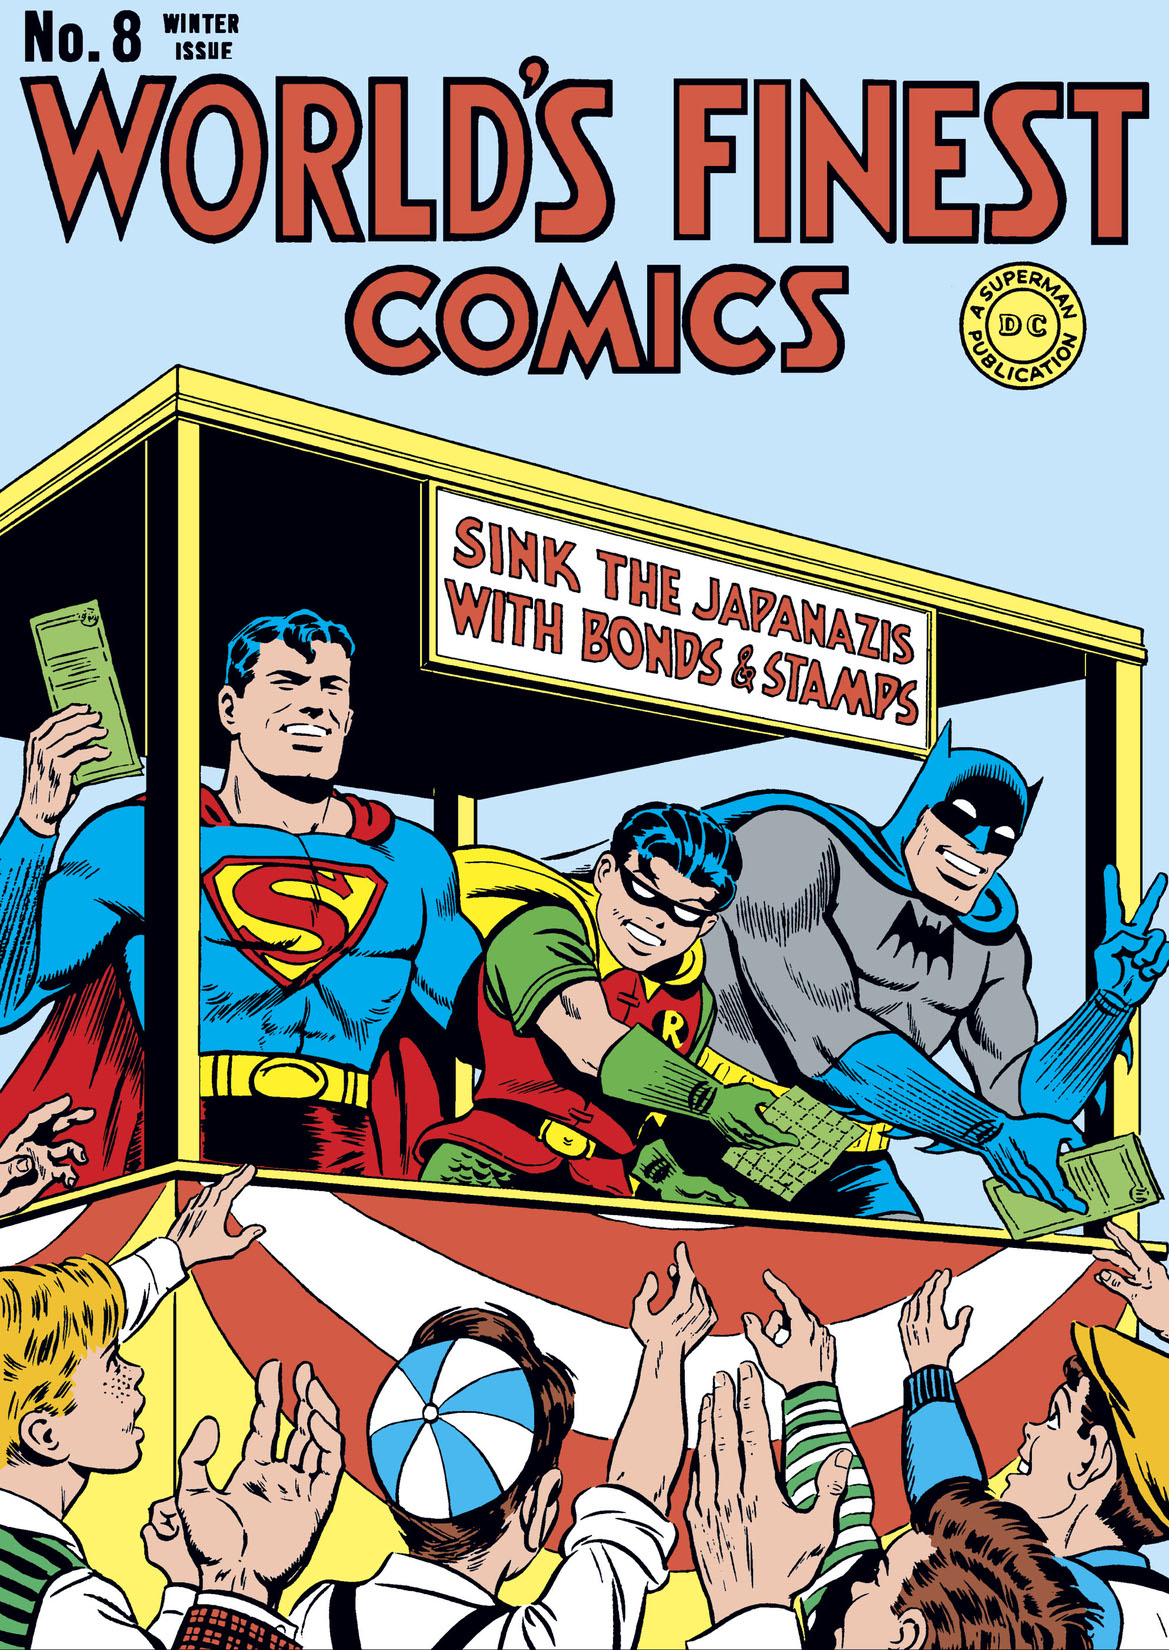 World's Finest Comics (1941-) #8 preview images